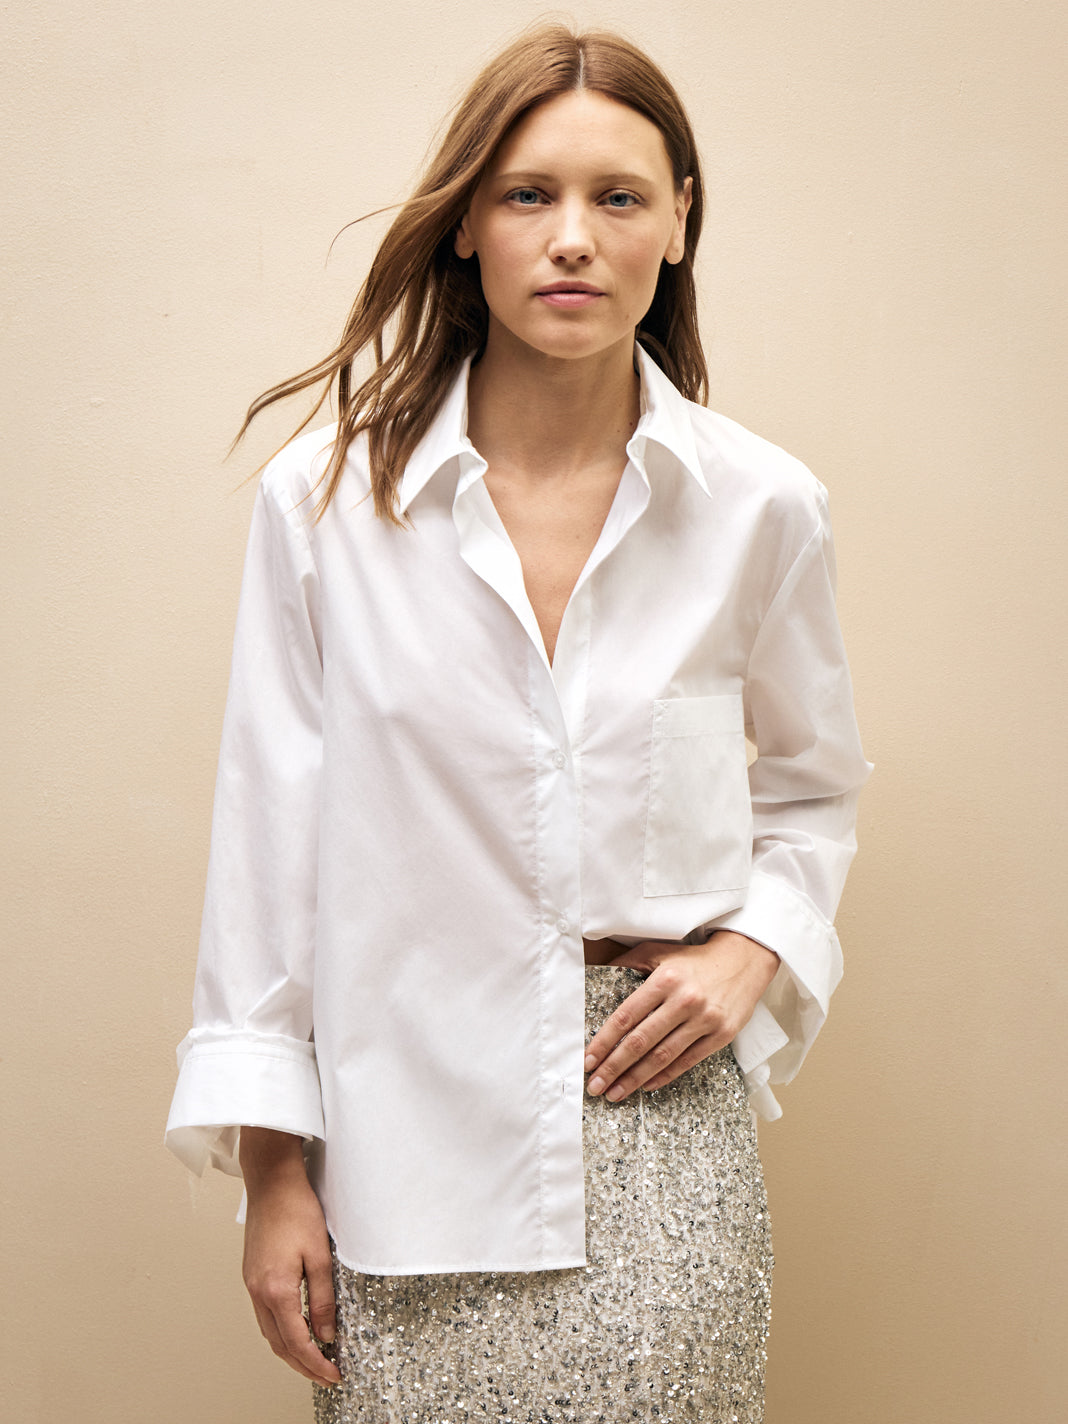 White Morning After Shirt in Superfine Cotton | TWP